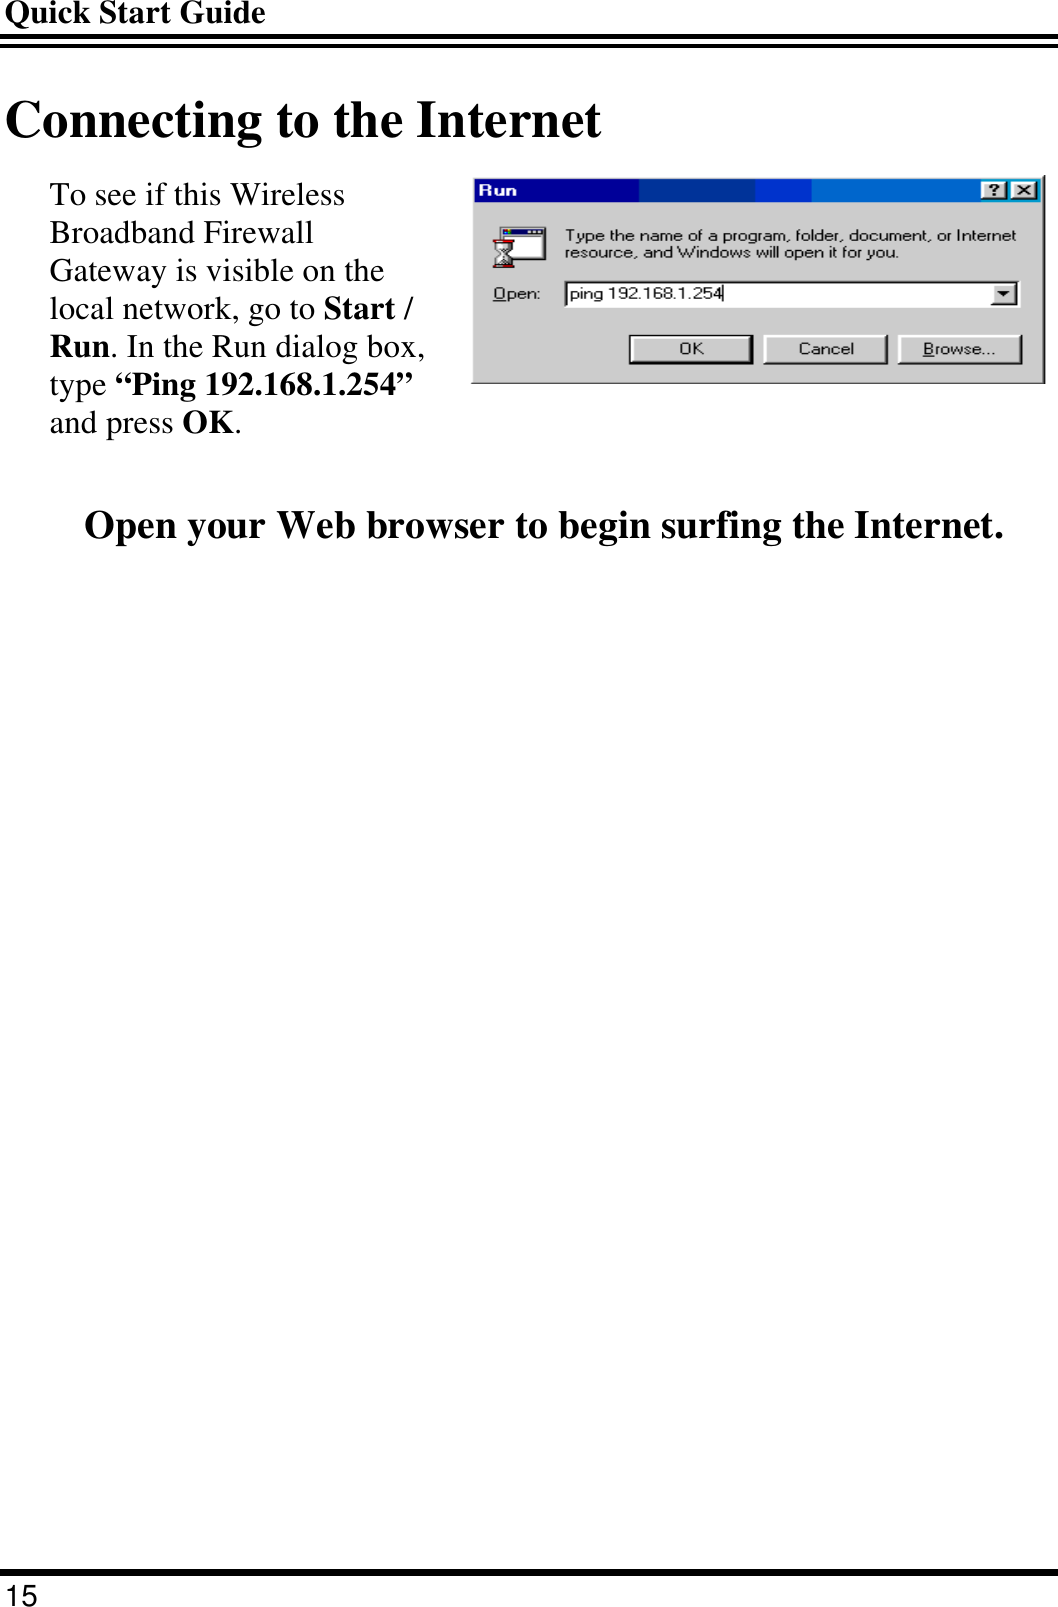 Quick Start Guide 15 Connecting to the Internet To see if this Wireless Broadband Firewall Gateway is visible on the local network, go to Start / Run. In the Run dialog box, type “Ping 192.168.1.254” and press OK.  Open your Web browser to begin surfing the Internet. 